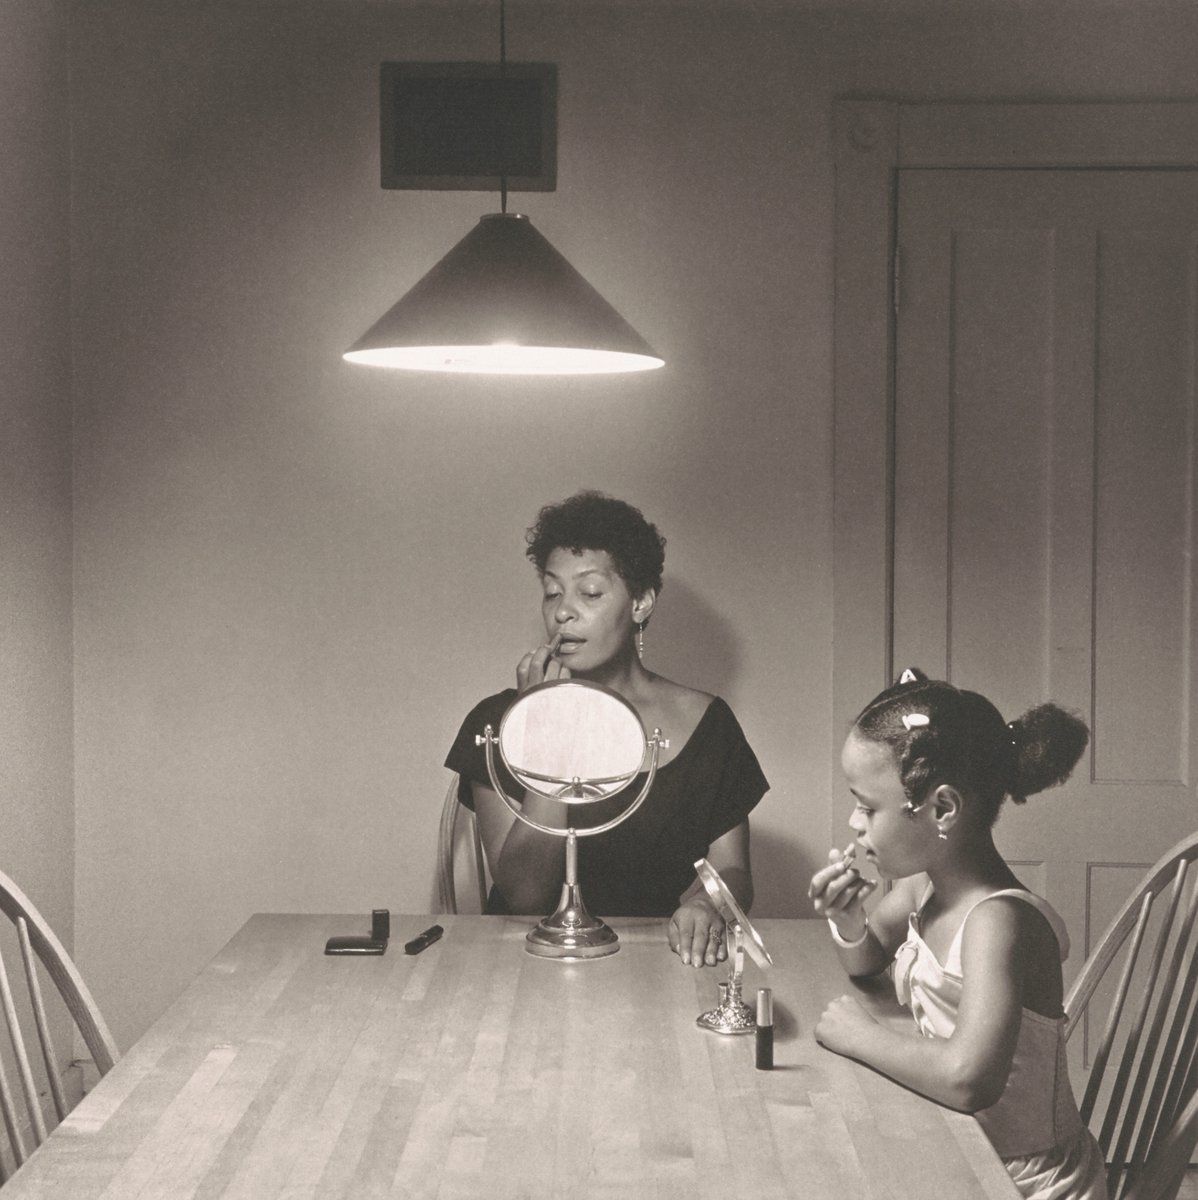 UNTITLED (WOMAN AND DAUGHTER WITH MAKE UP), Carrie Mae Weems, 1990 #blackarthistory